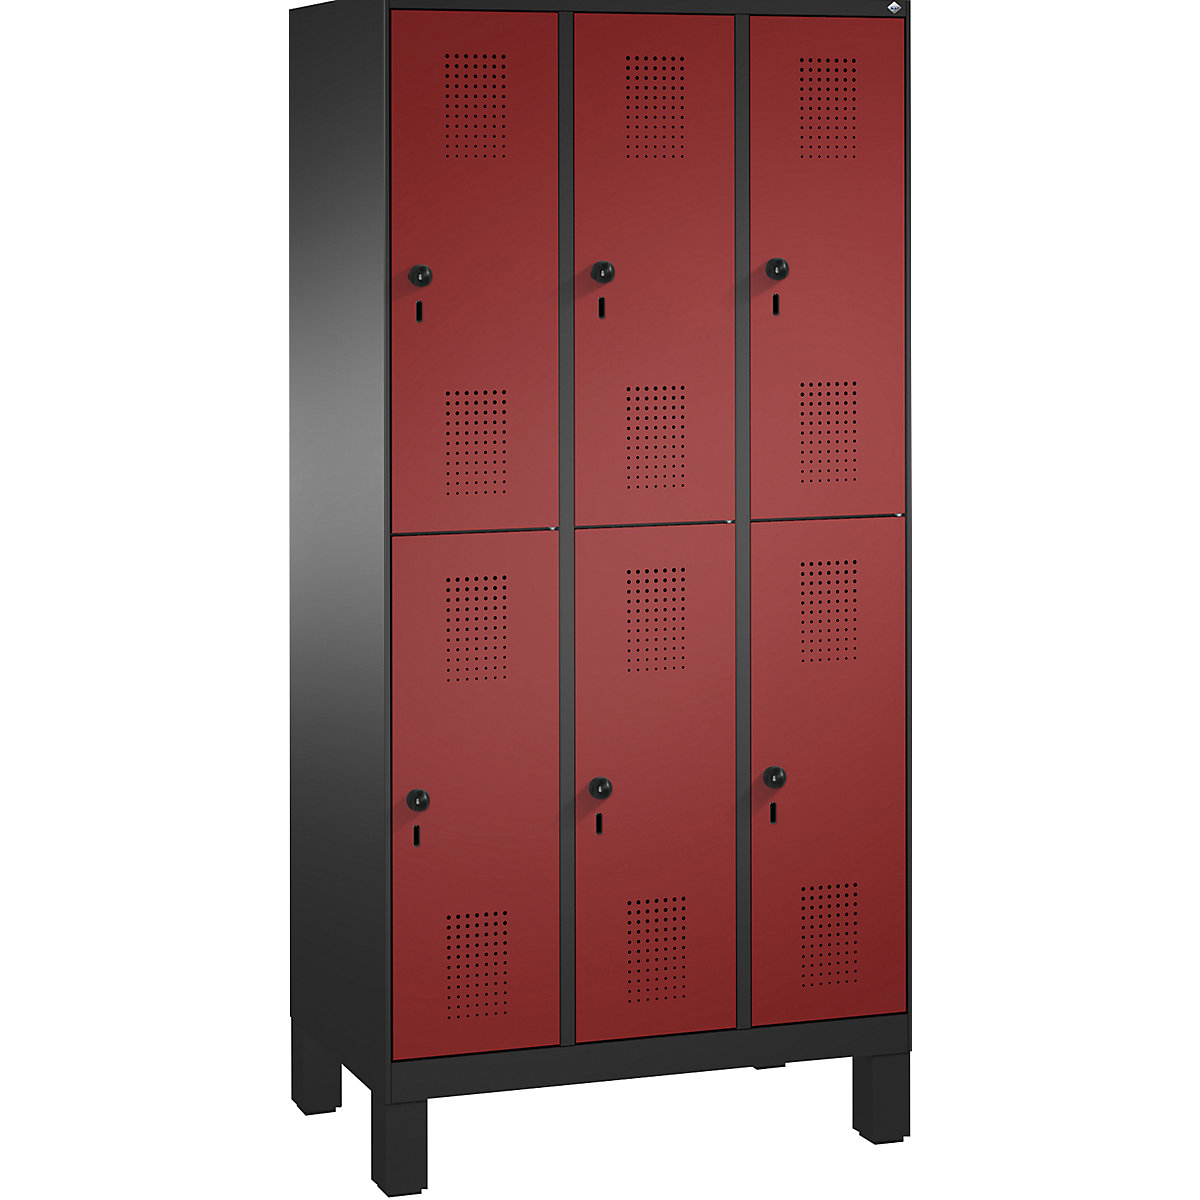 EVOLO cloakroom locker, double tier, with feet – C+P, 3 compartments, 2 shelf compartments each, compartment width 300 mm, black grey / ruby red-11